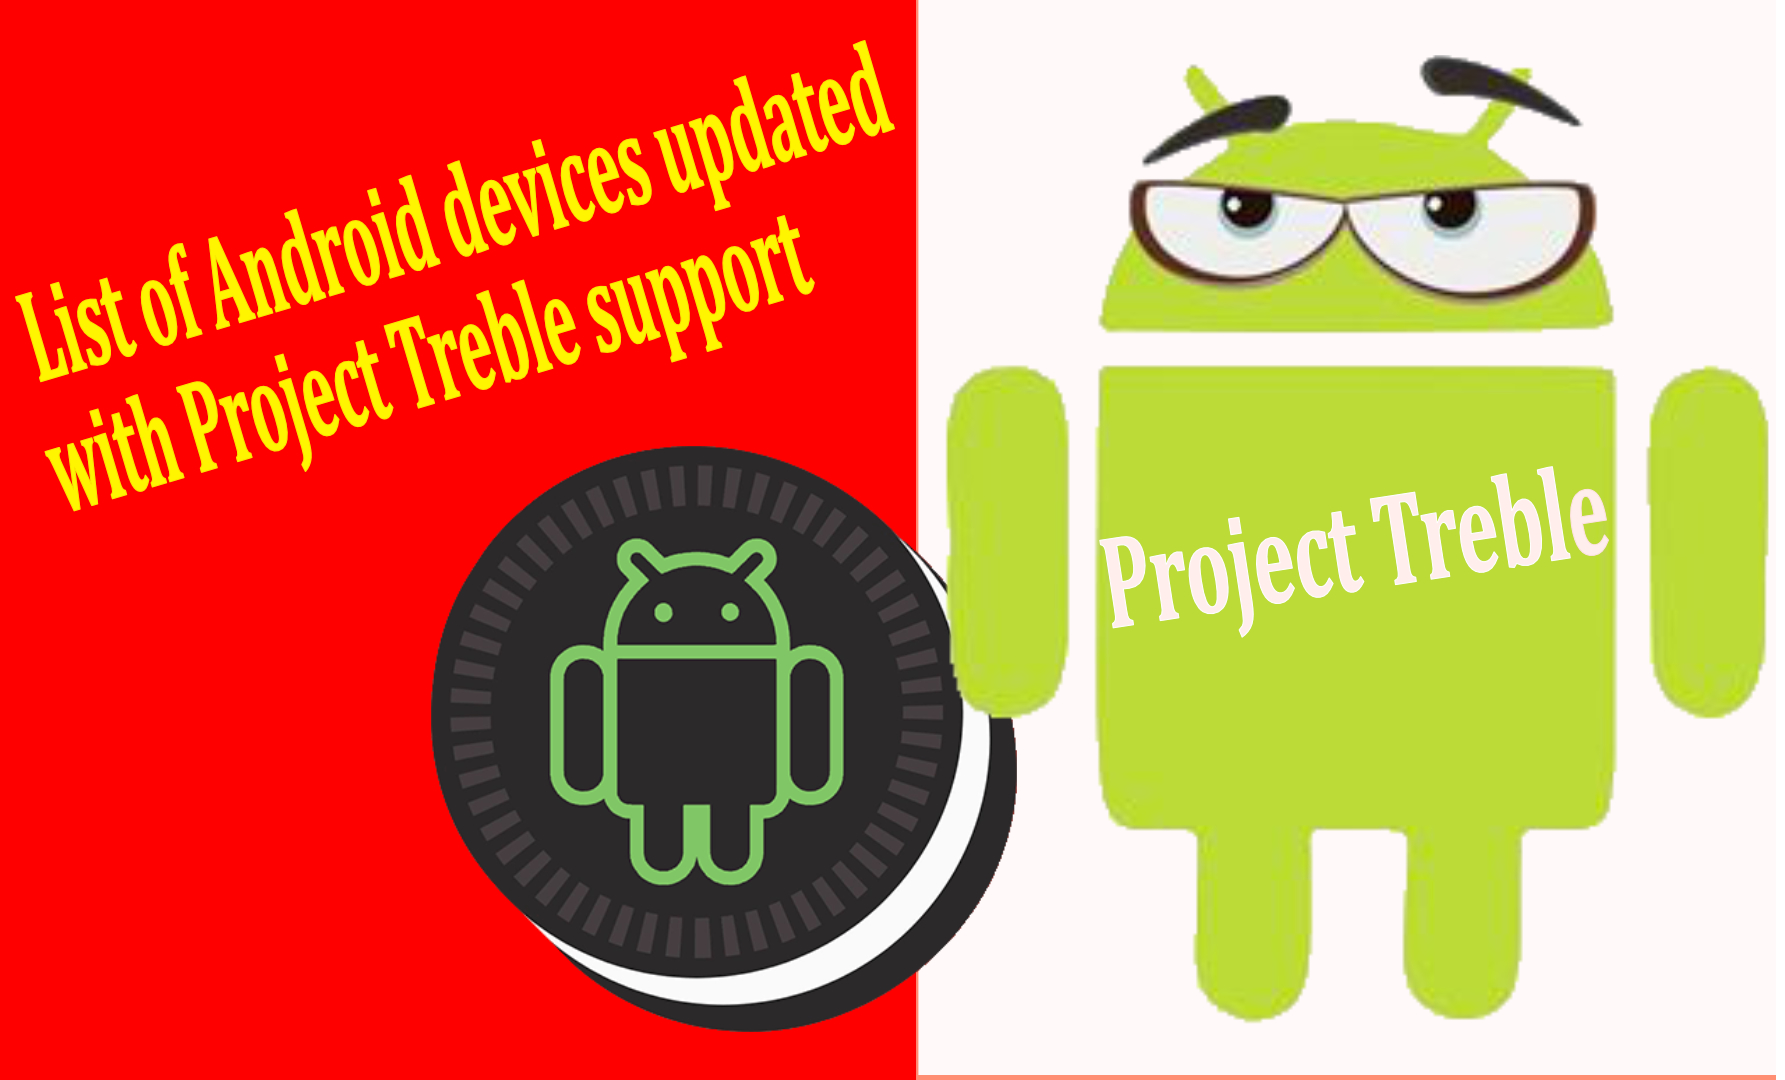 project treble android